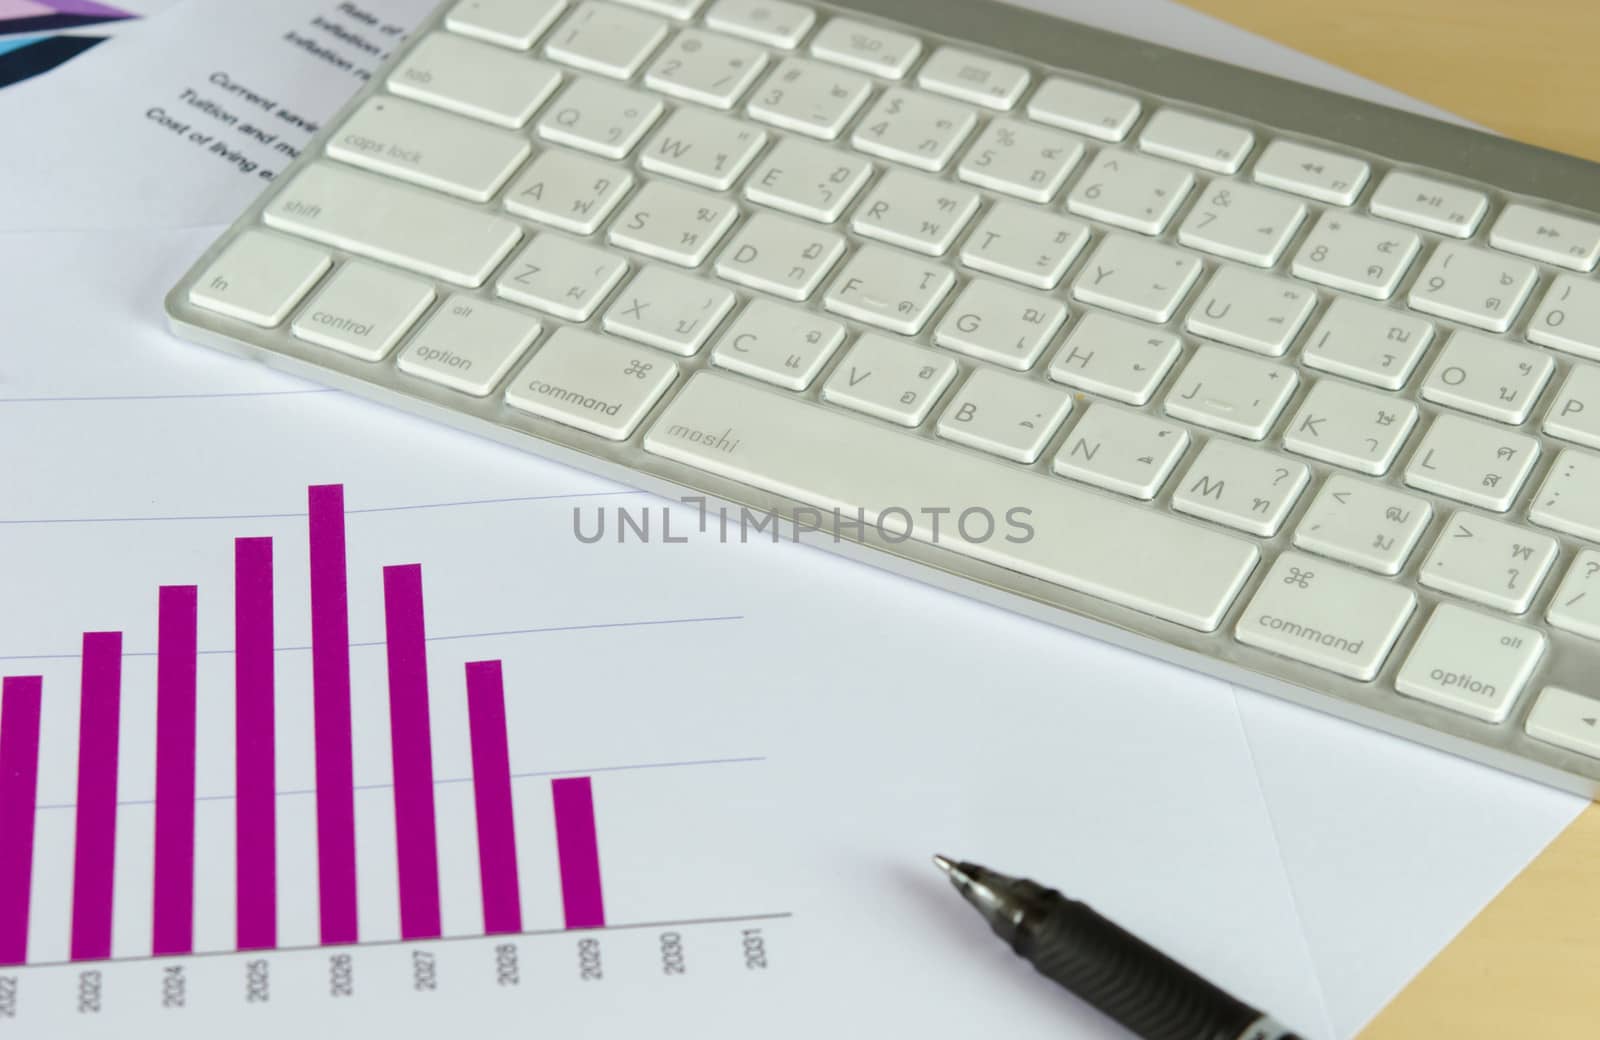 Business documents. Placed on the table with keyboard